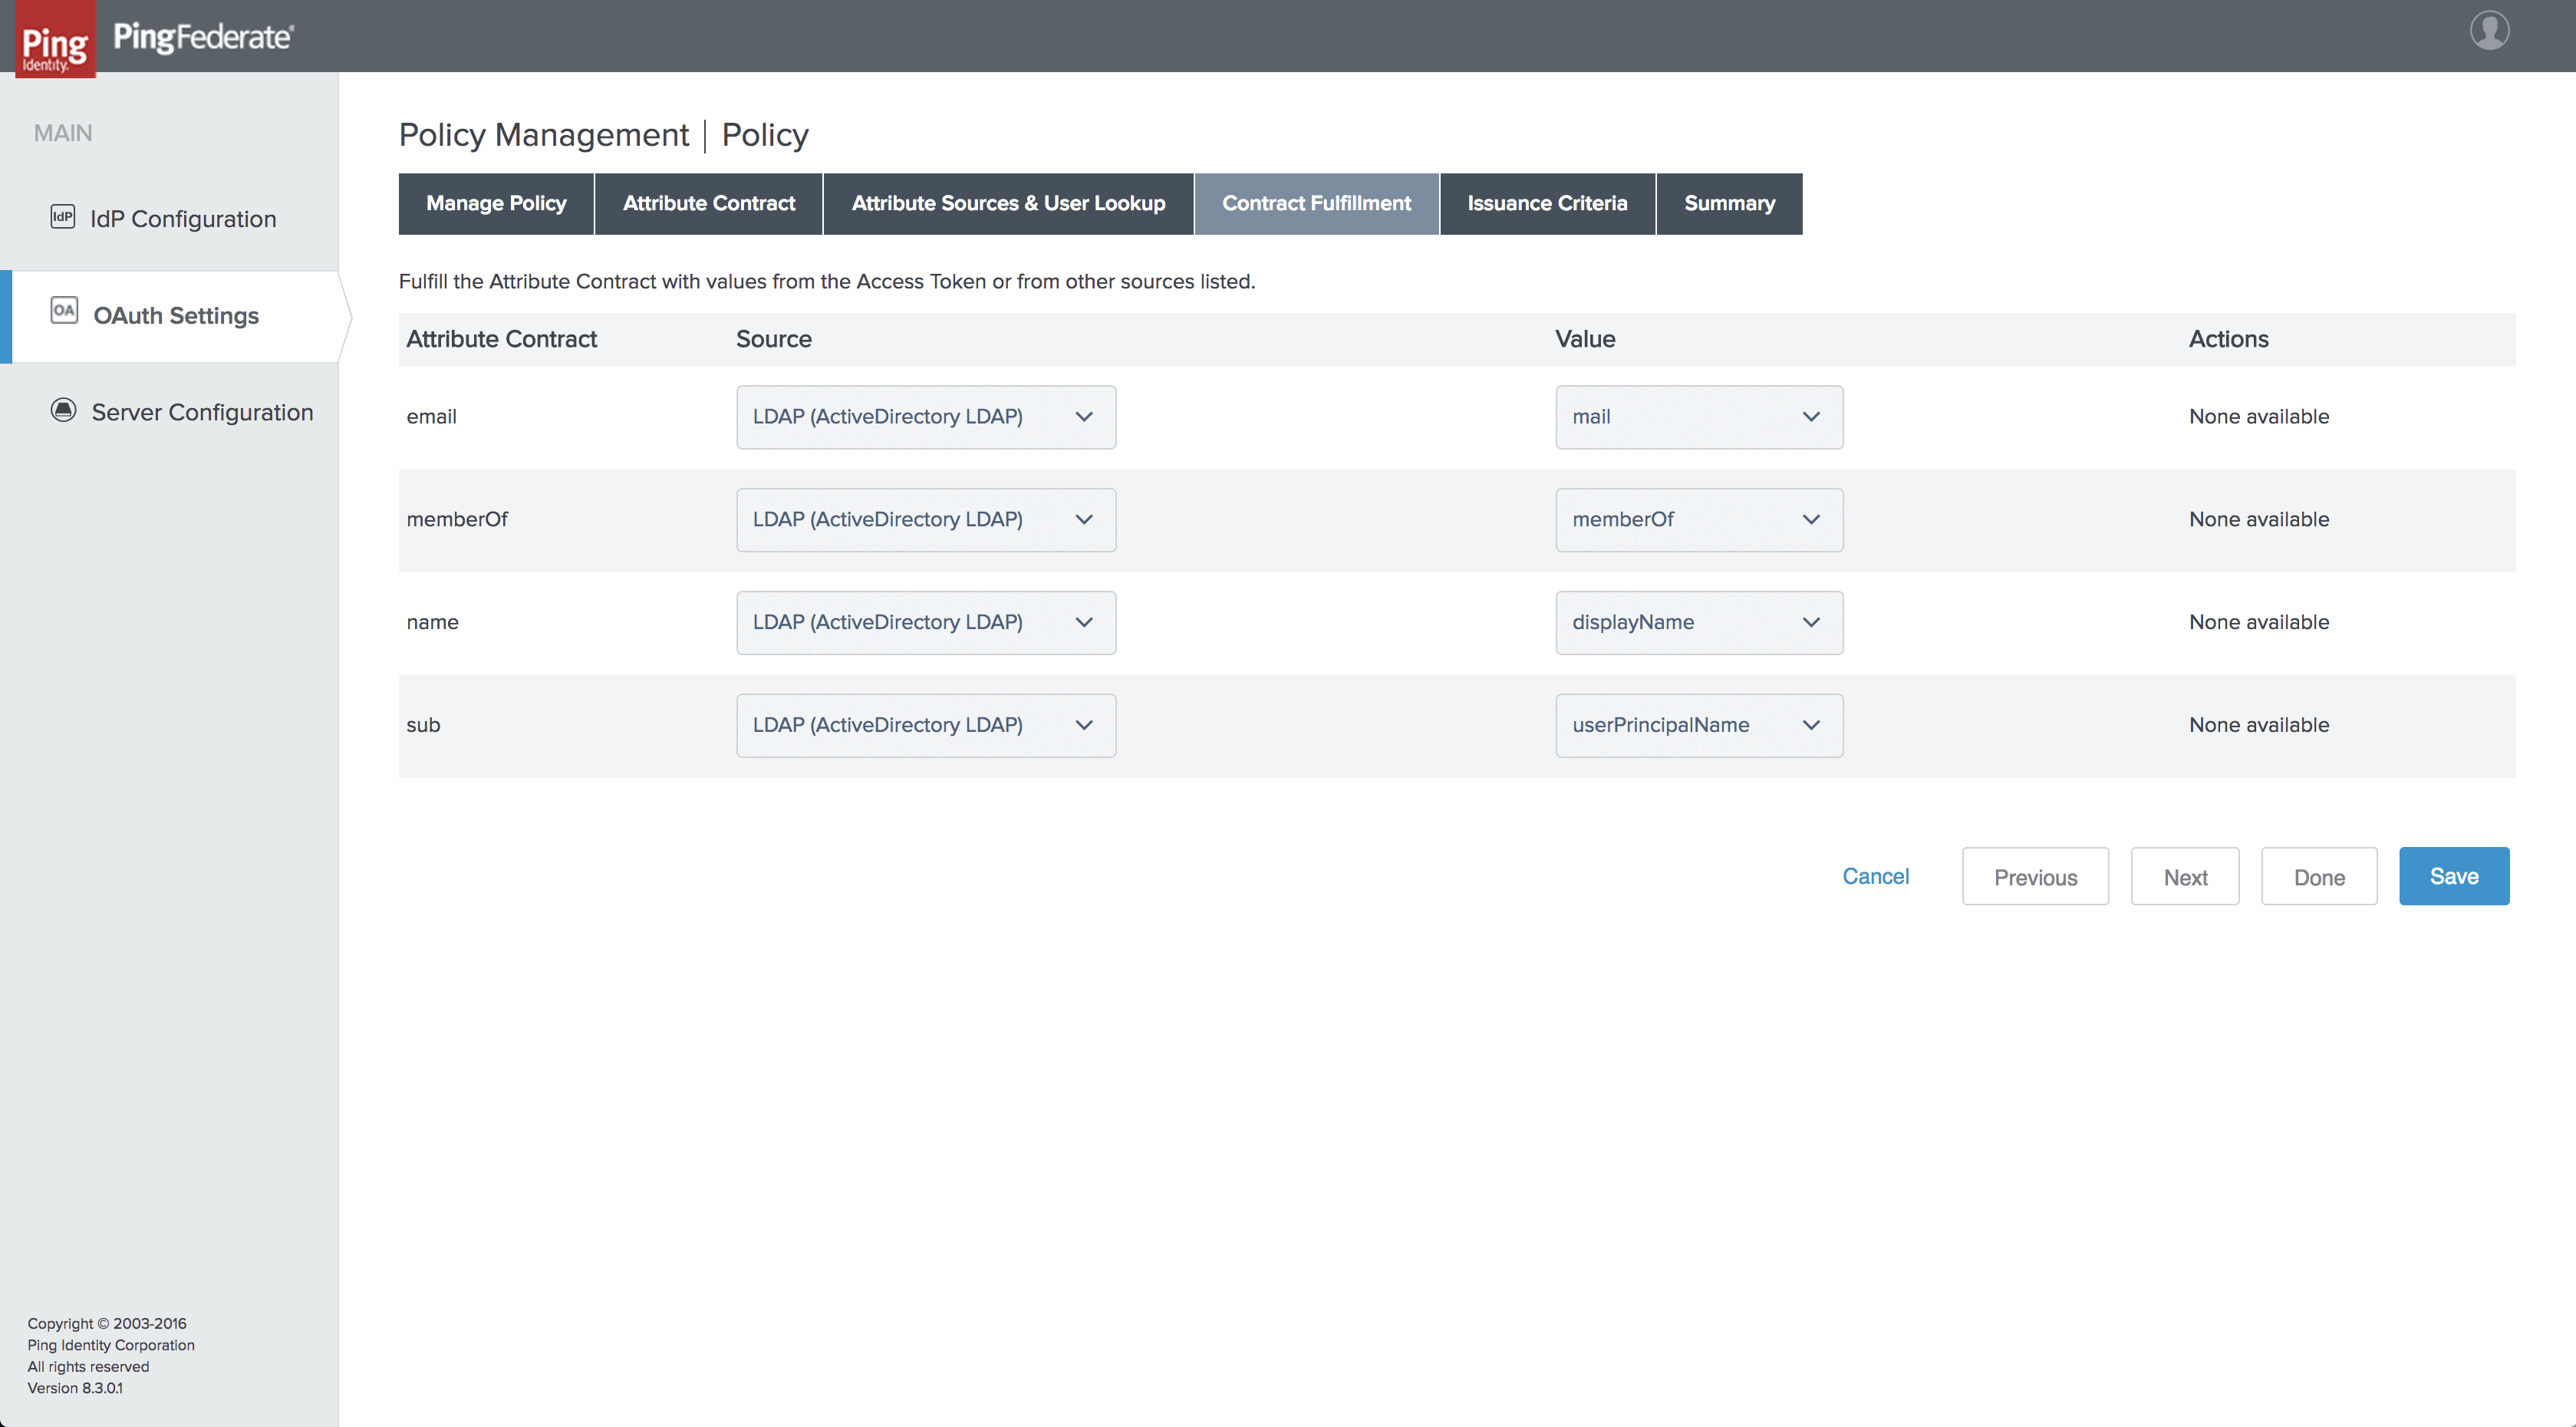 Configure contract fulfillment information in PingFederate